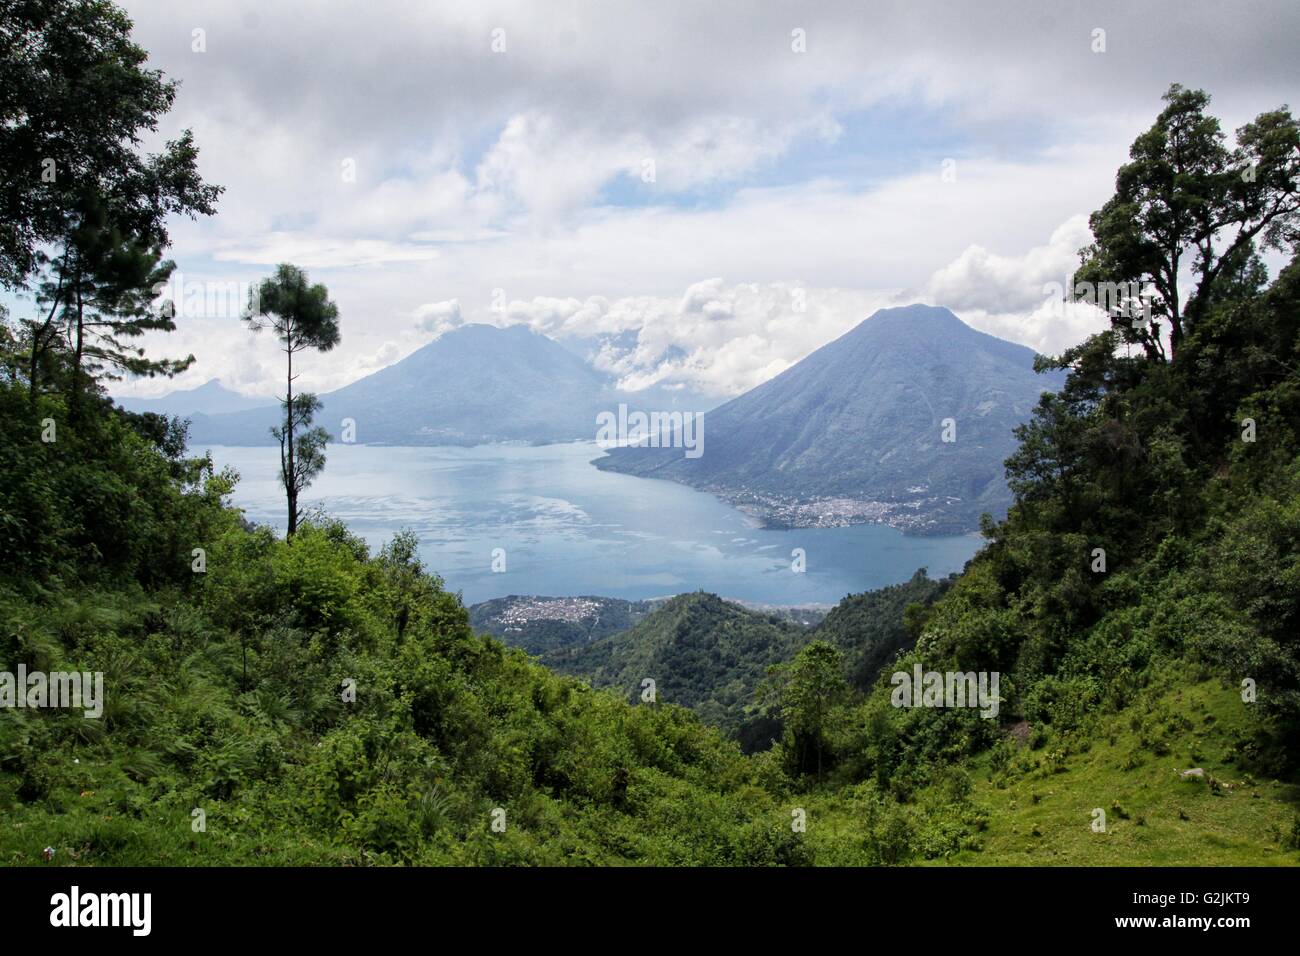 Volcanoes tower over the beautiful sacred Lake Atitlan in Guatemala with Mayan villages nestled in its banks. Stock Photo